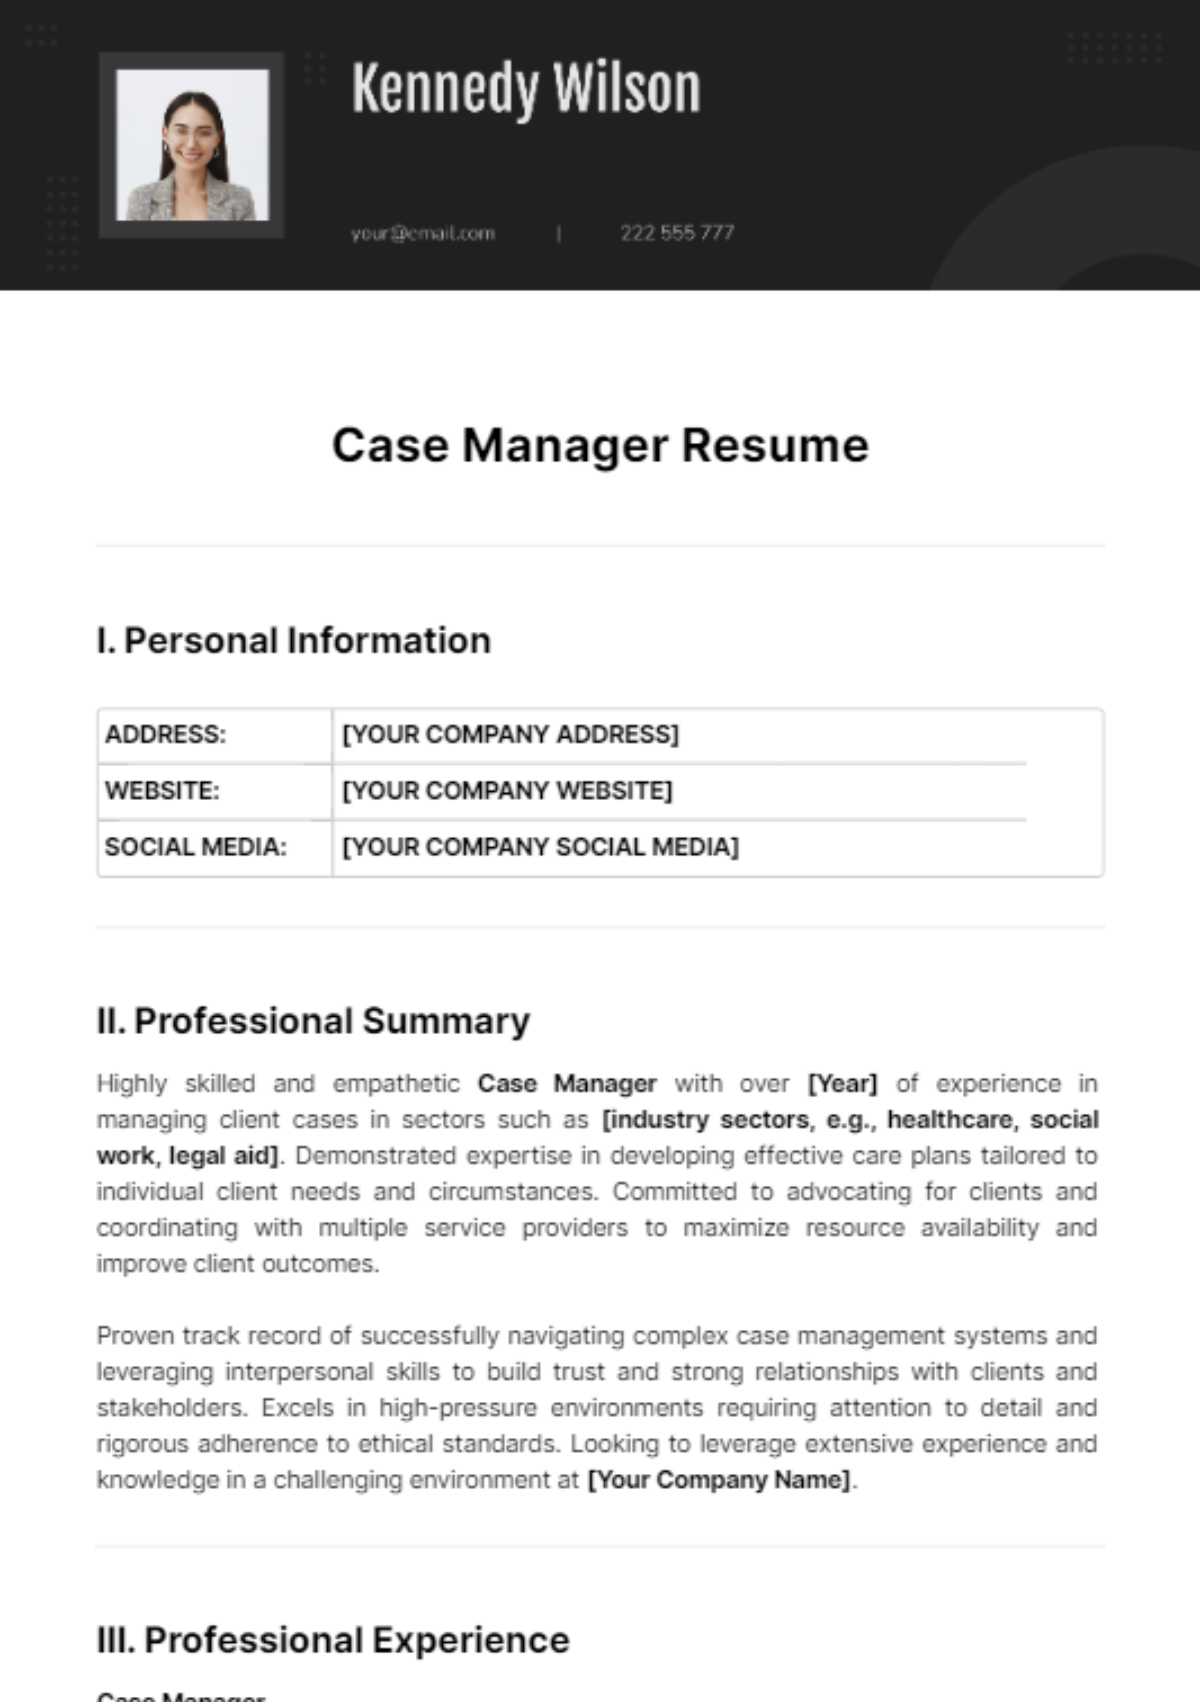 Case Manager Resume Template